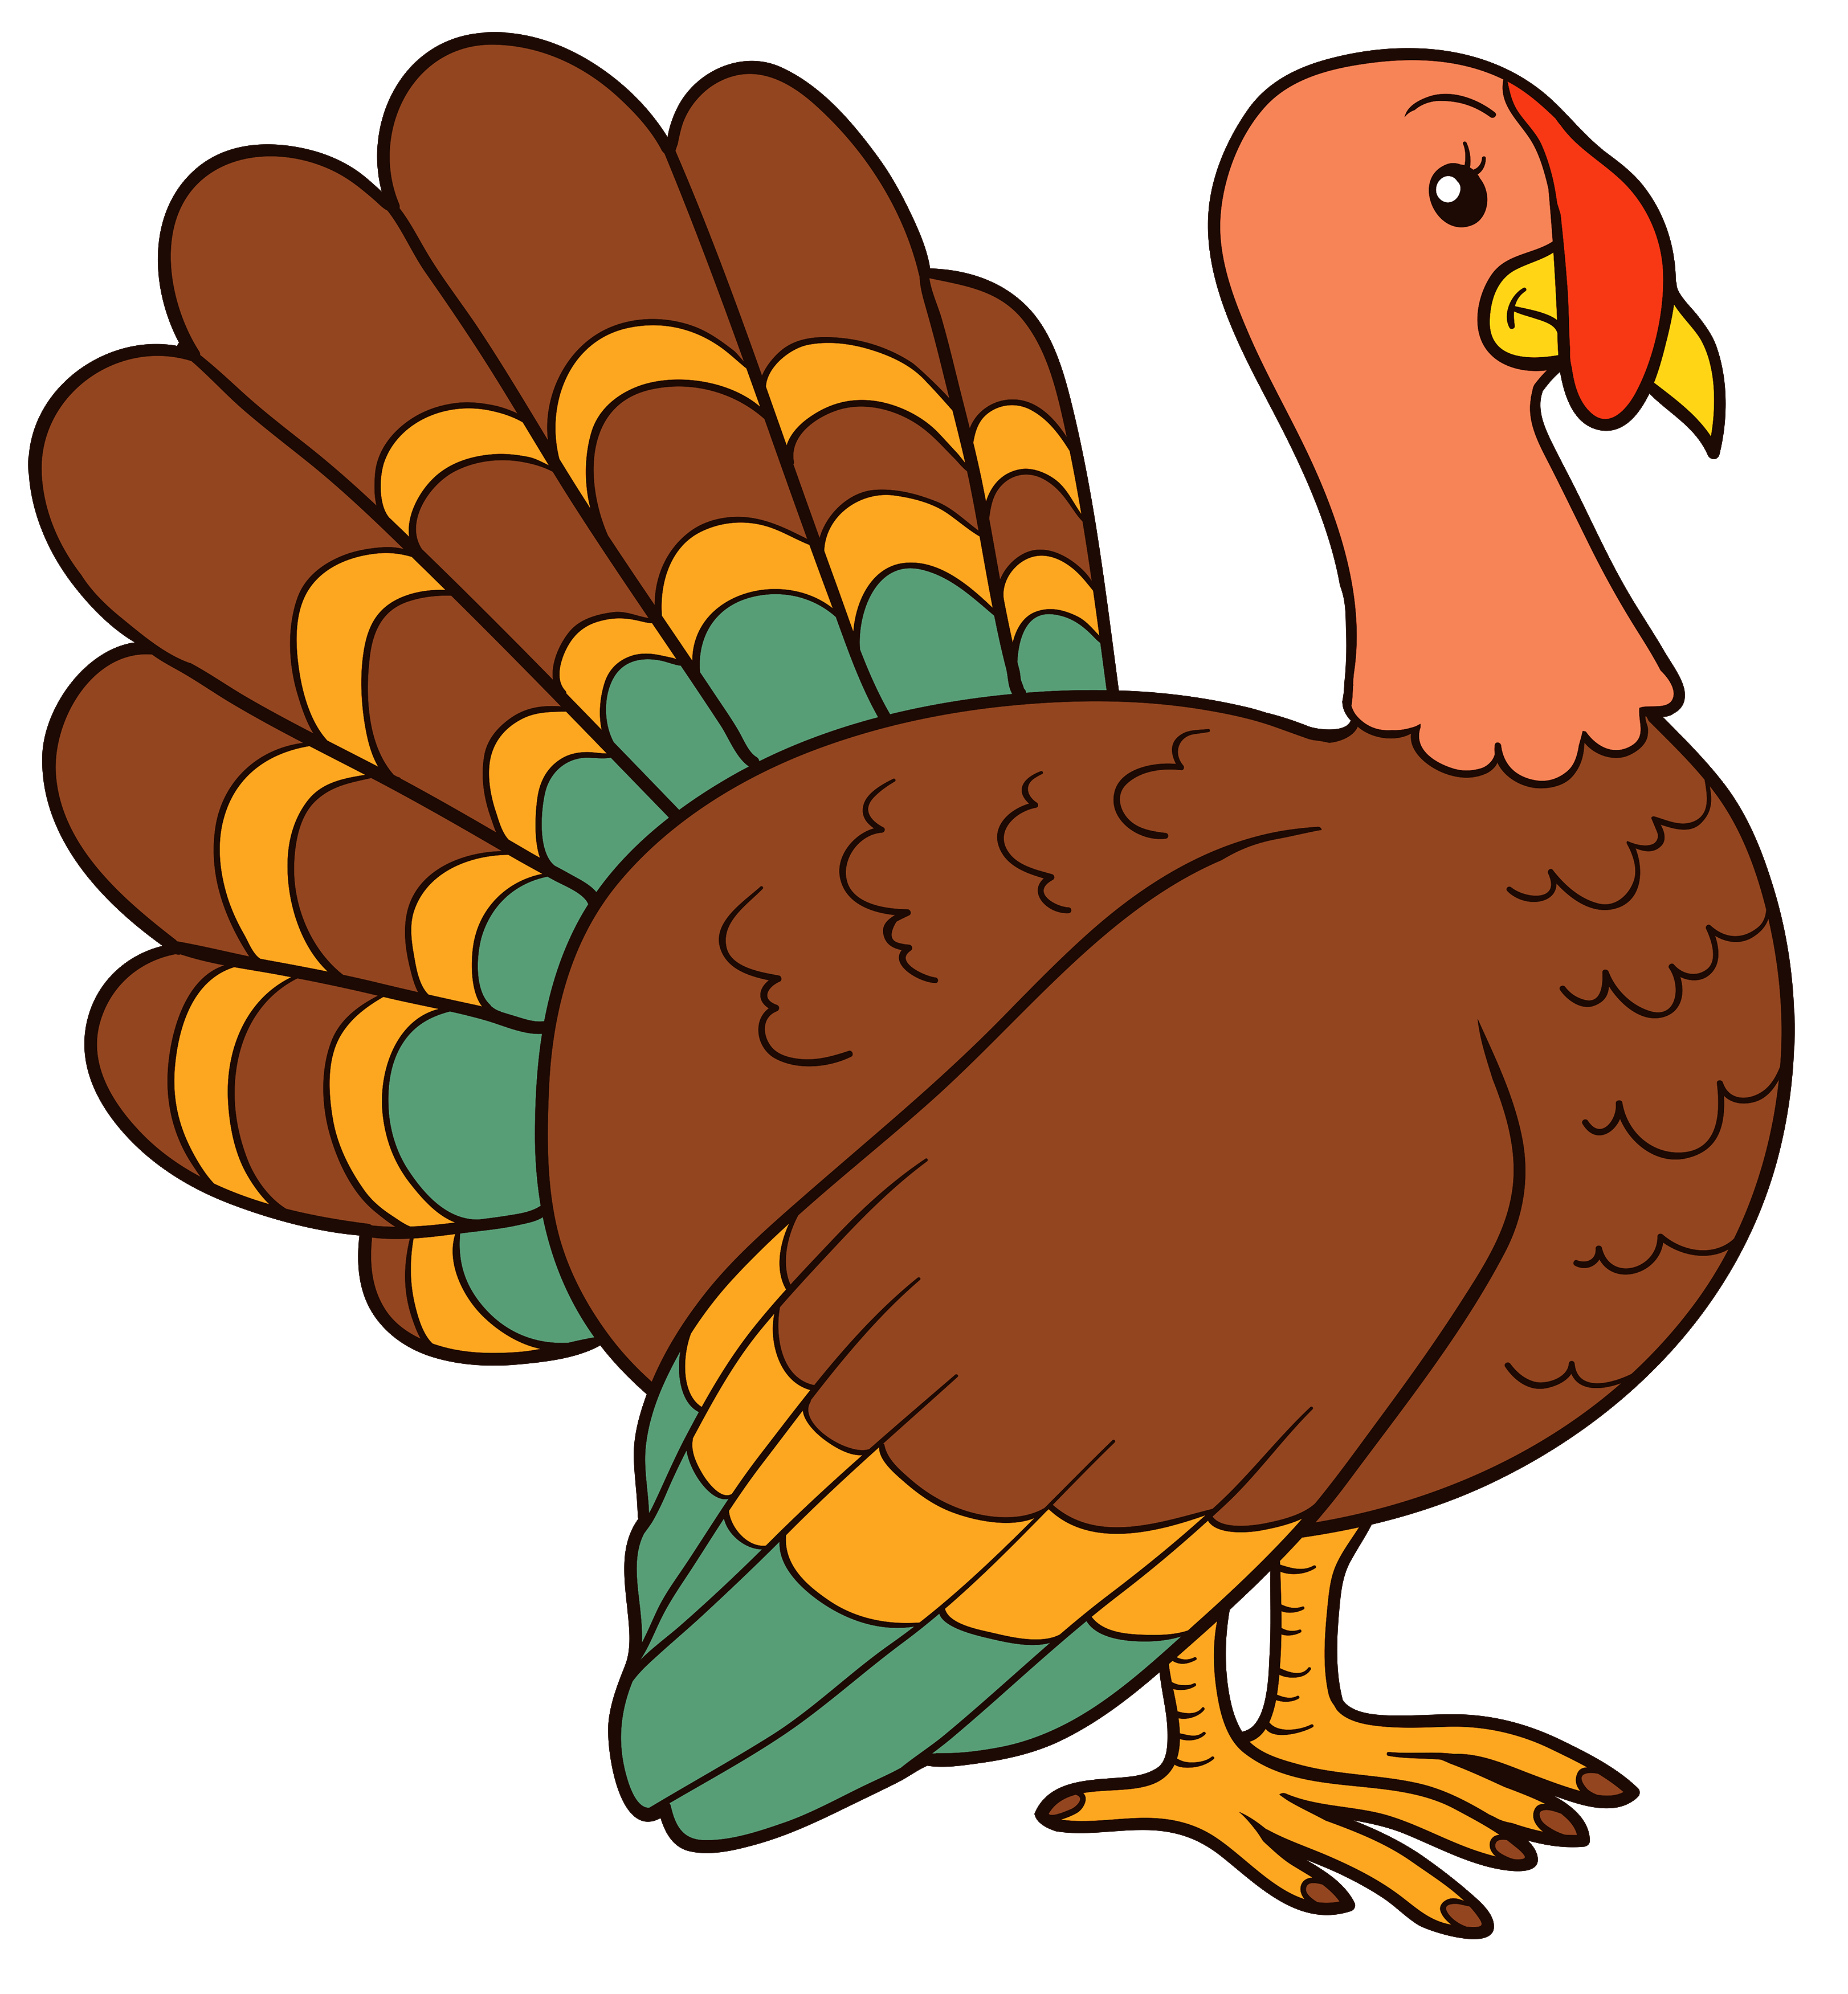 Mr clipart manager. Turkey png image best